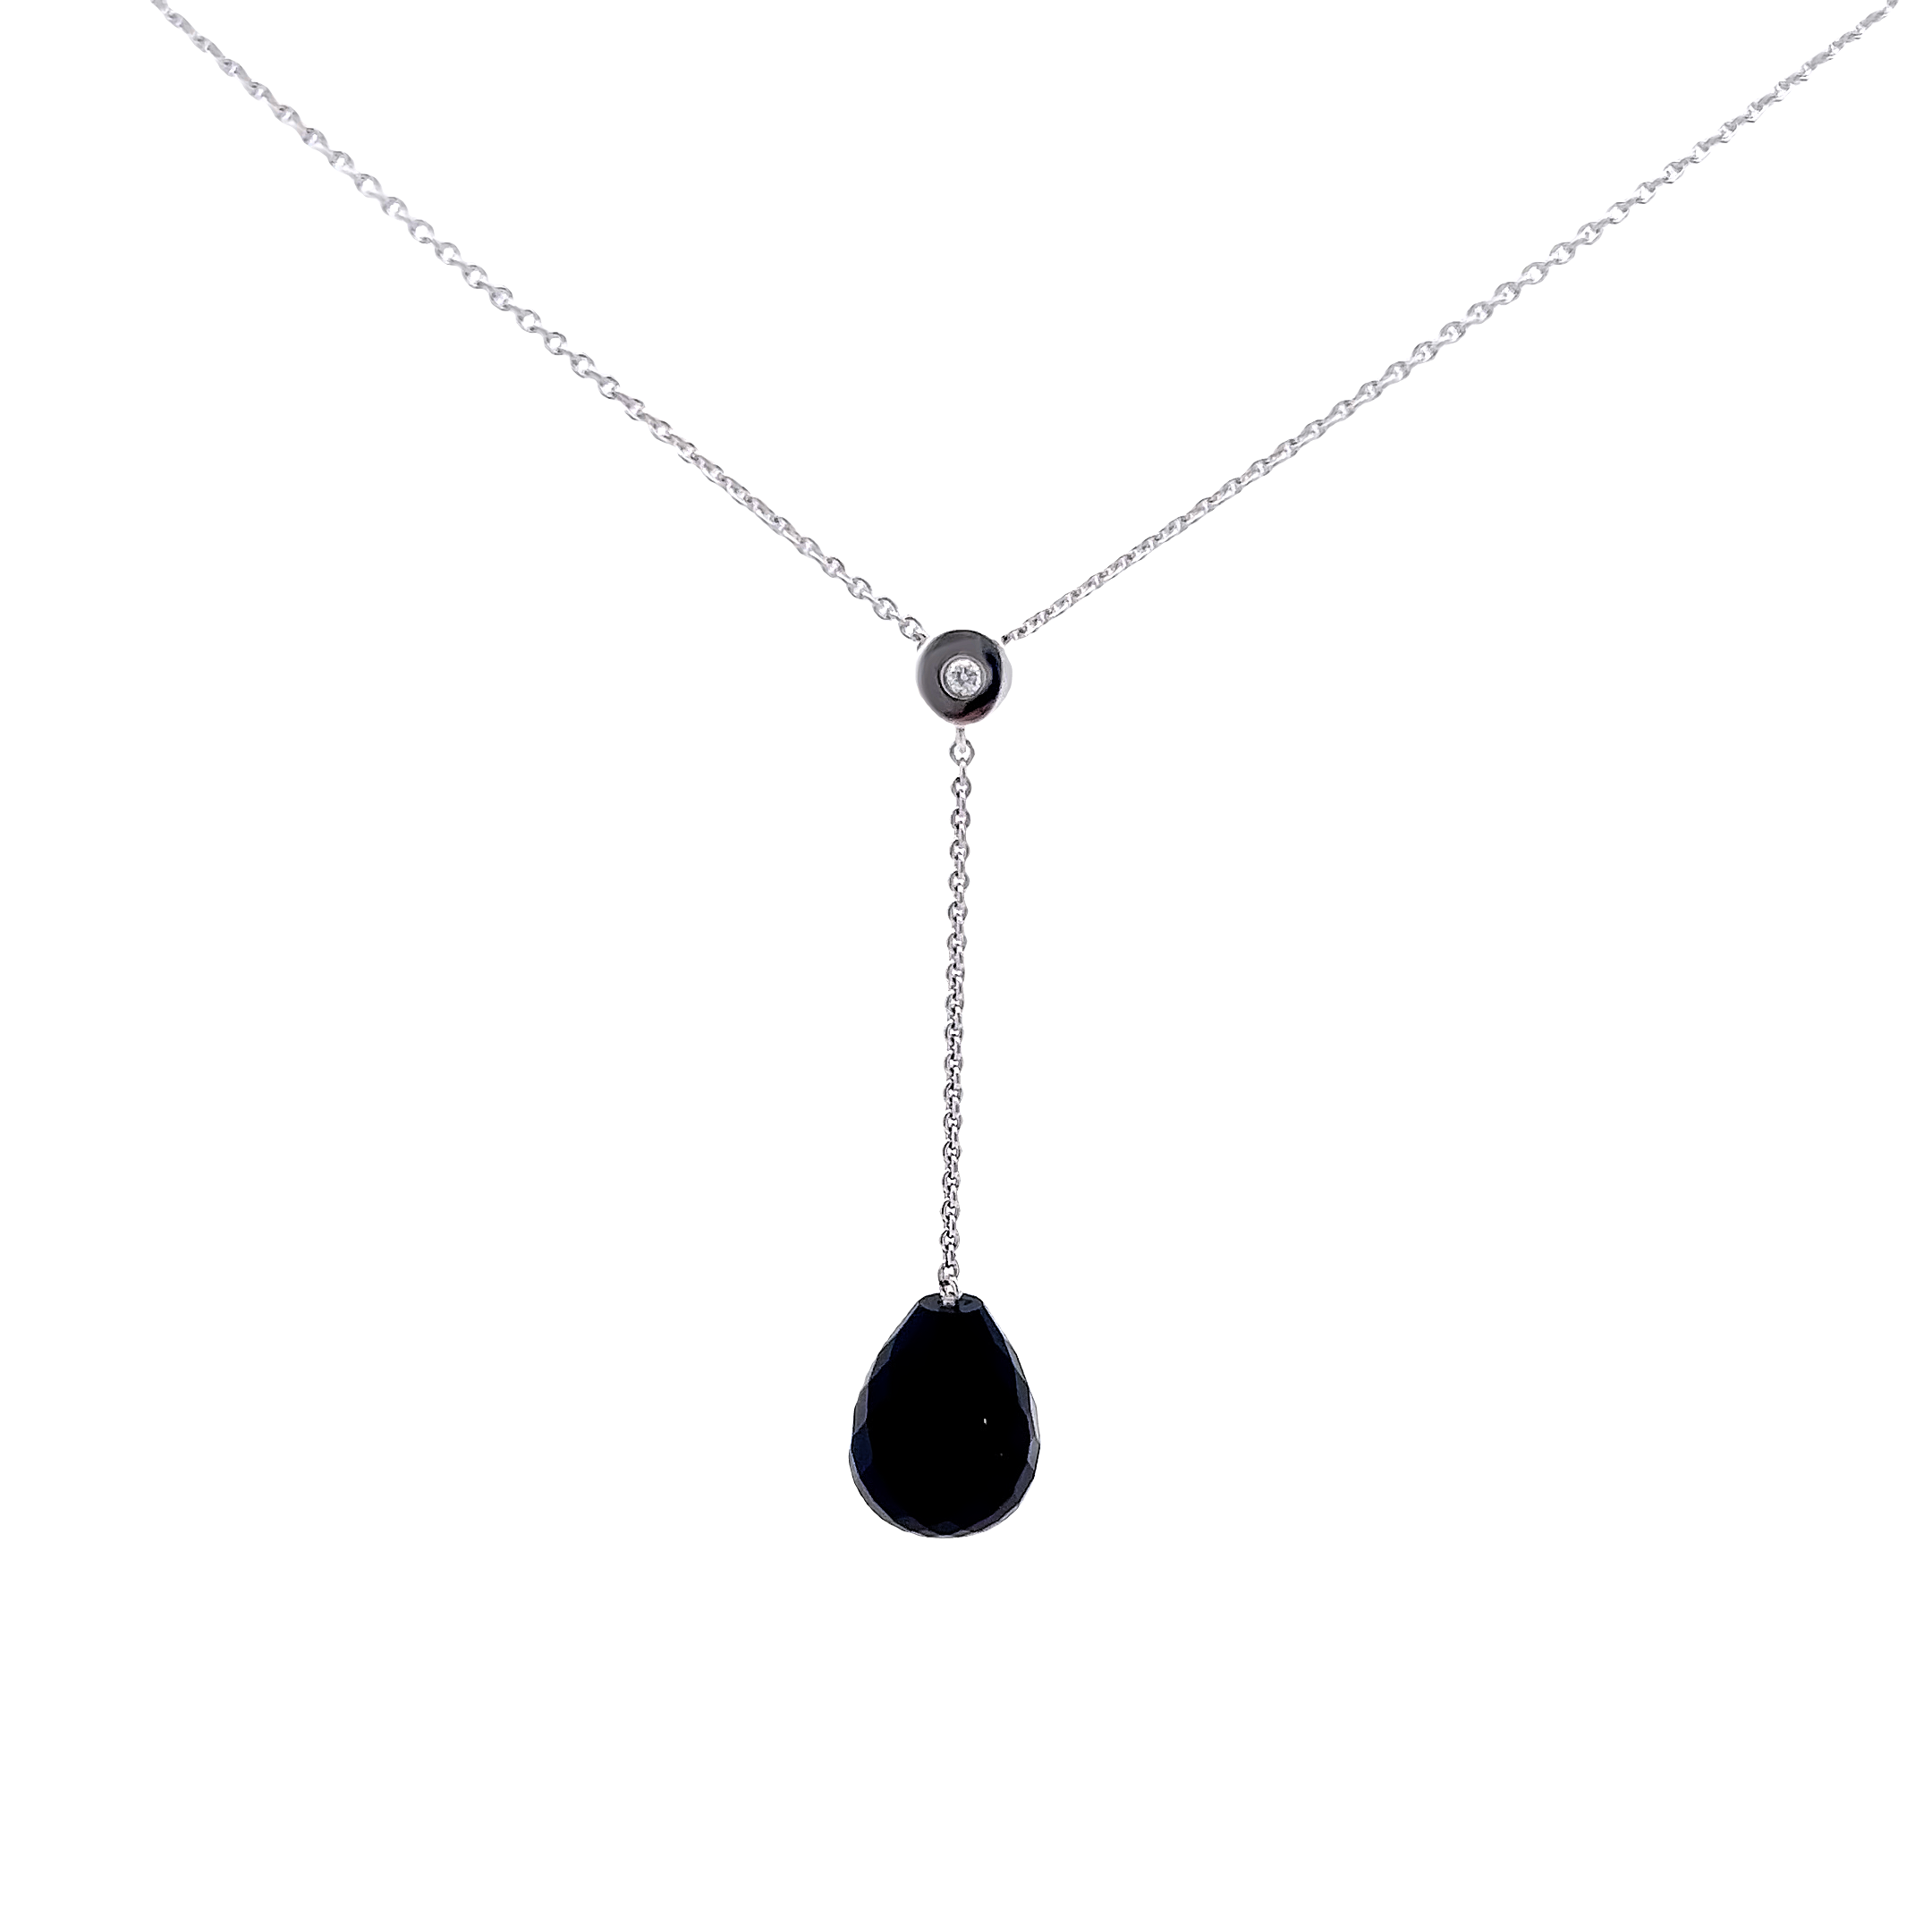 Sterling Y Drop Necklace with One 9.00X11.00Mm Briolette Onyx and one=.02 total weight round brilliant G VS Diamond